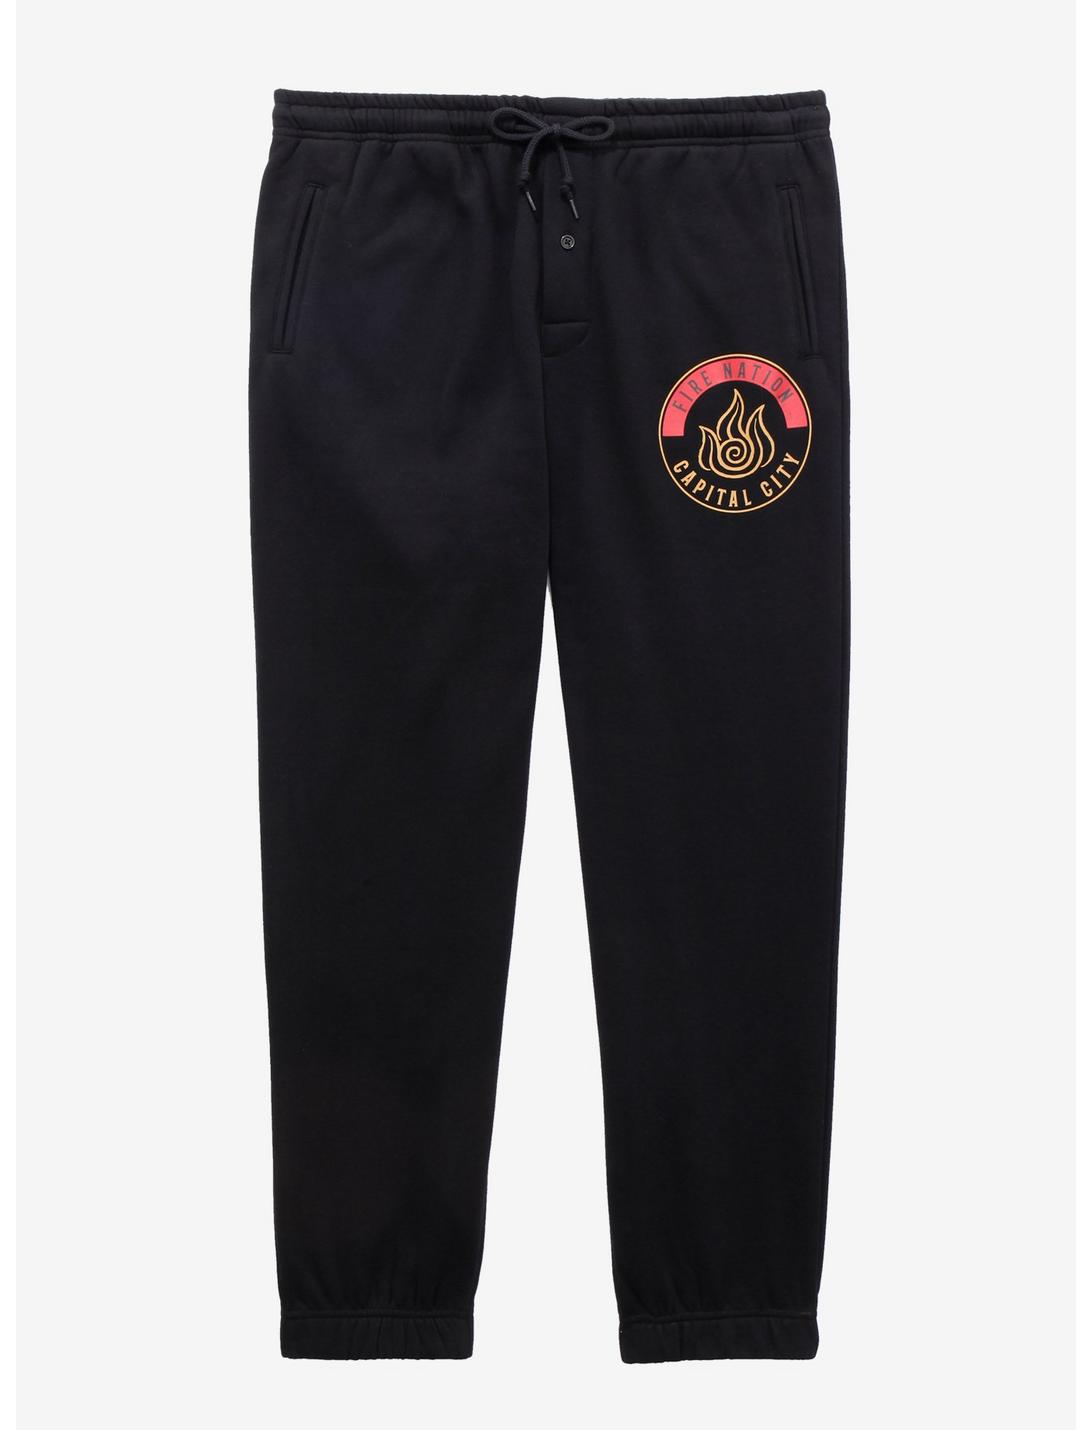 Avatar: The Last Airbender Fire Nation Joggers - BoxLunch Exclusive, BLACK, hi-res